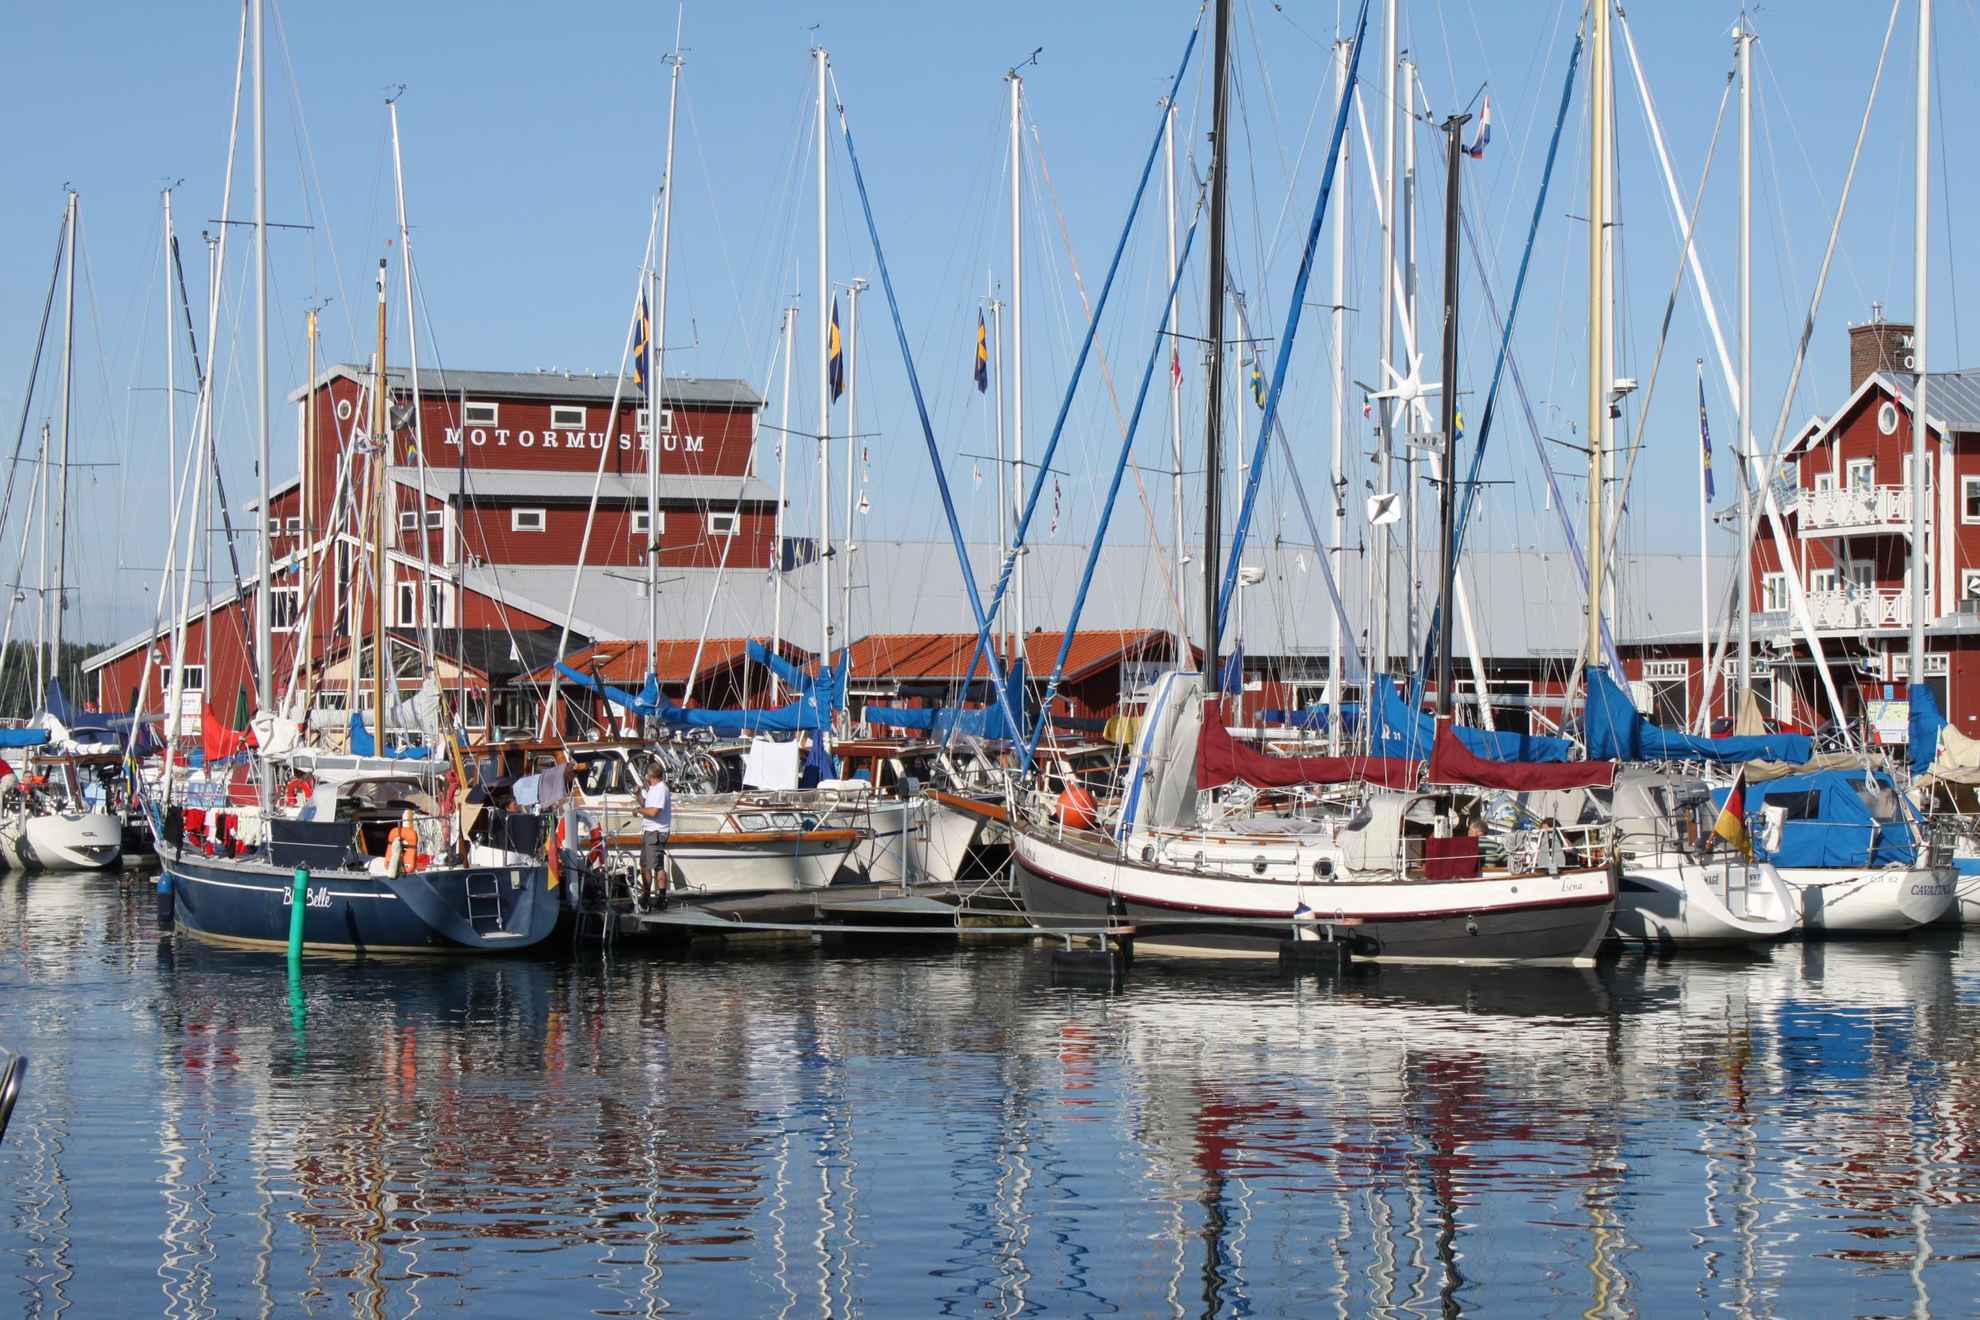 A harbor with several sailboats that are docked to a jetty.